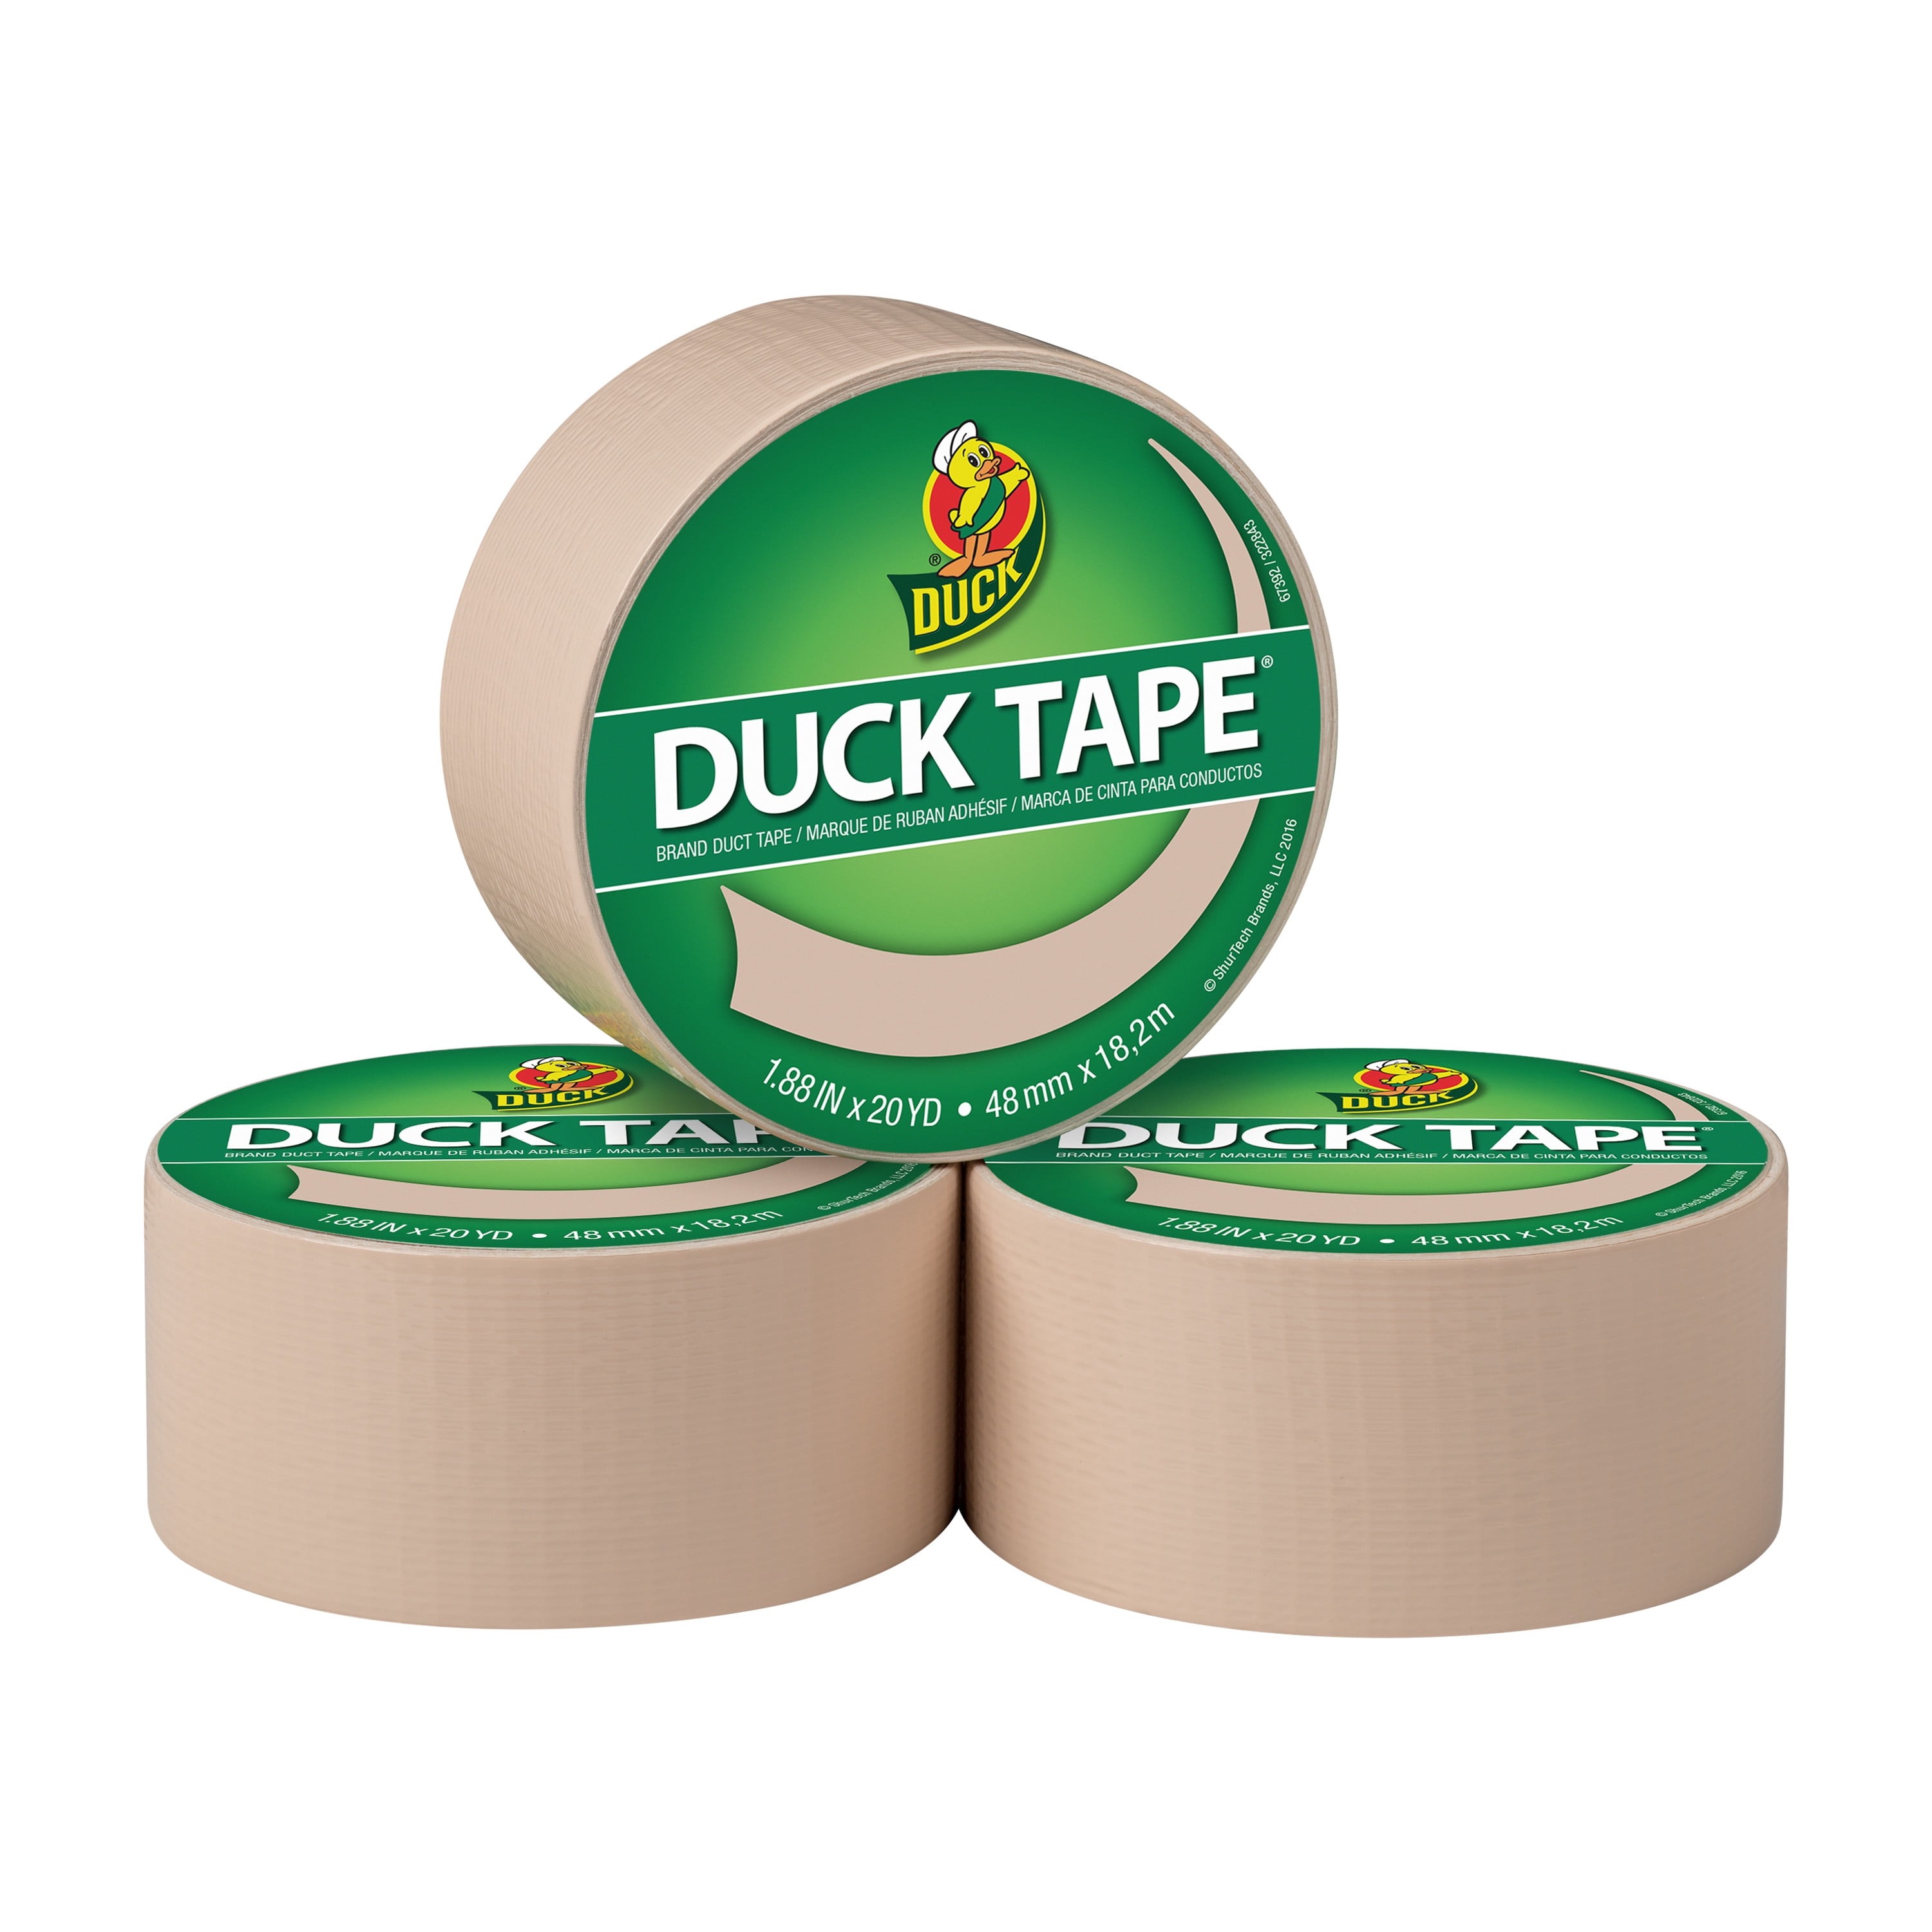 WOD DTC10 Advanced Strength Industrial Grade Tan (Beige) Duct Tape, 1 inch  x 60 yds. Waterproof, UV Resistant For Crafts & Home Improvement